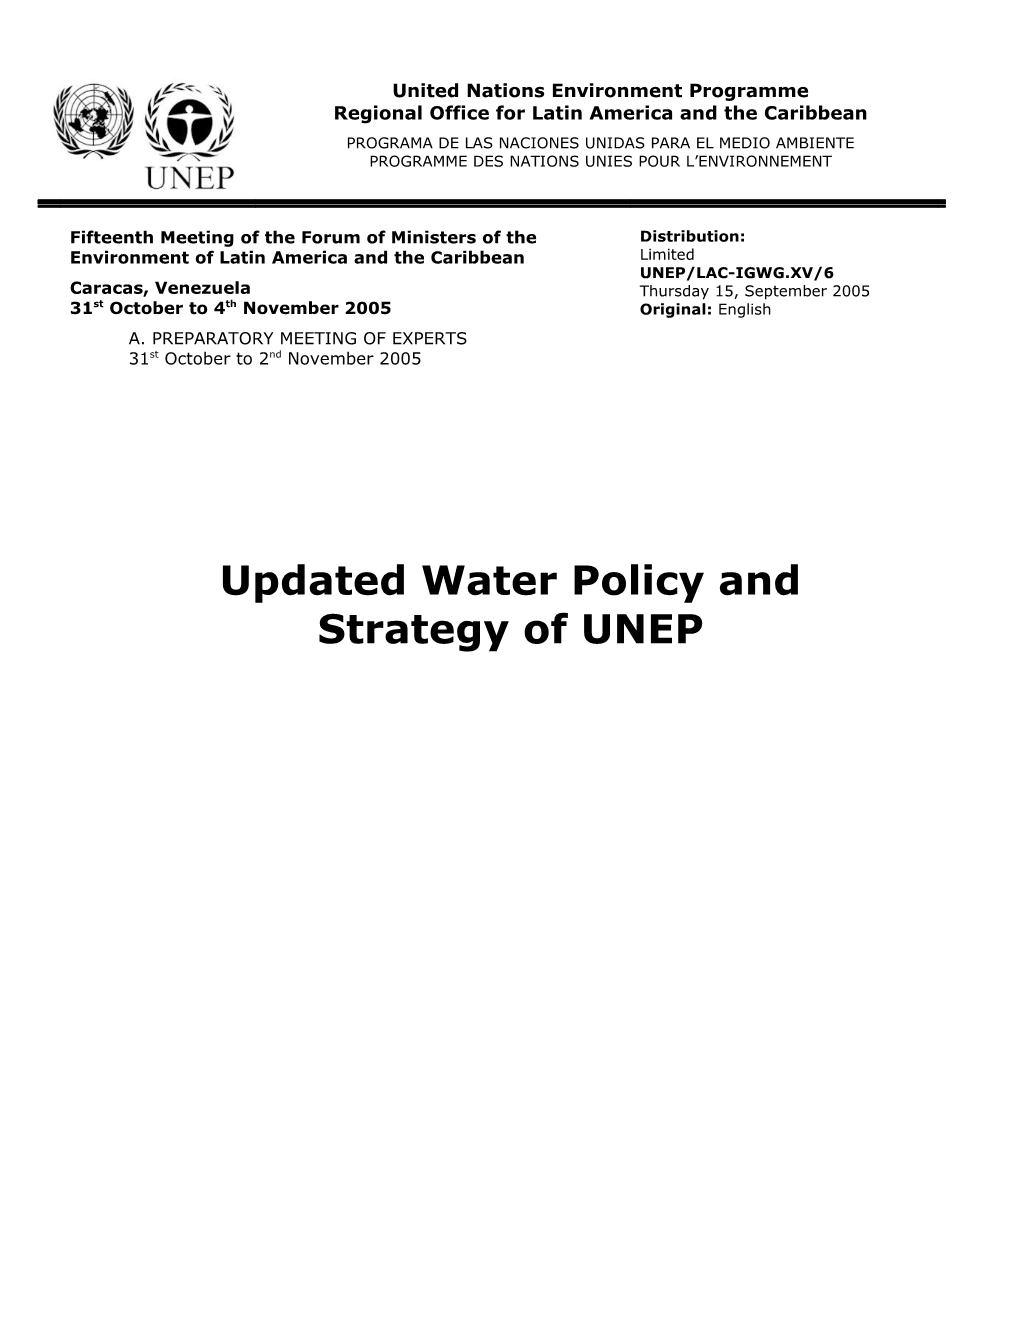 Updated Water Policy and Strategy of UNEP